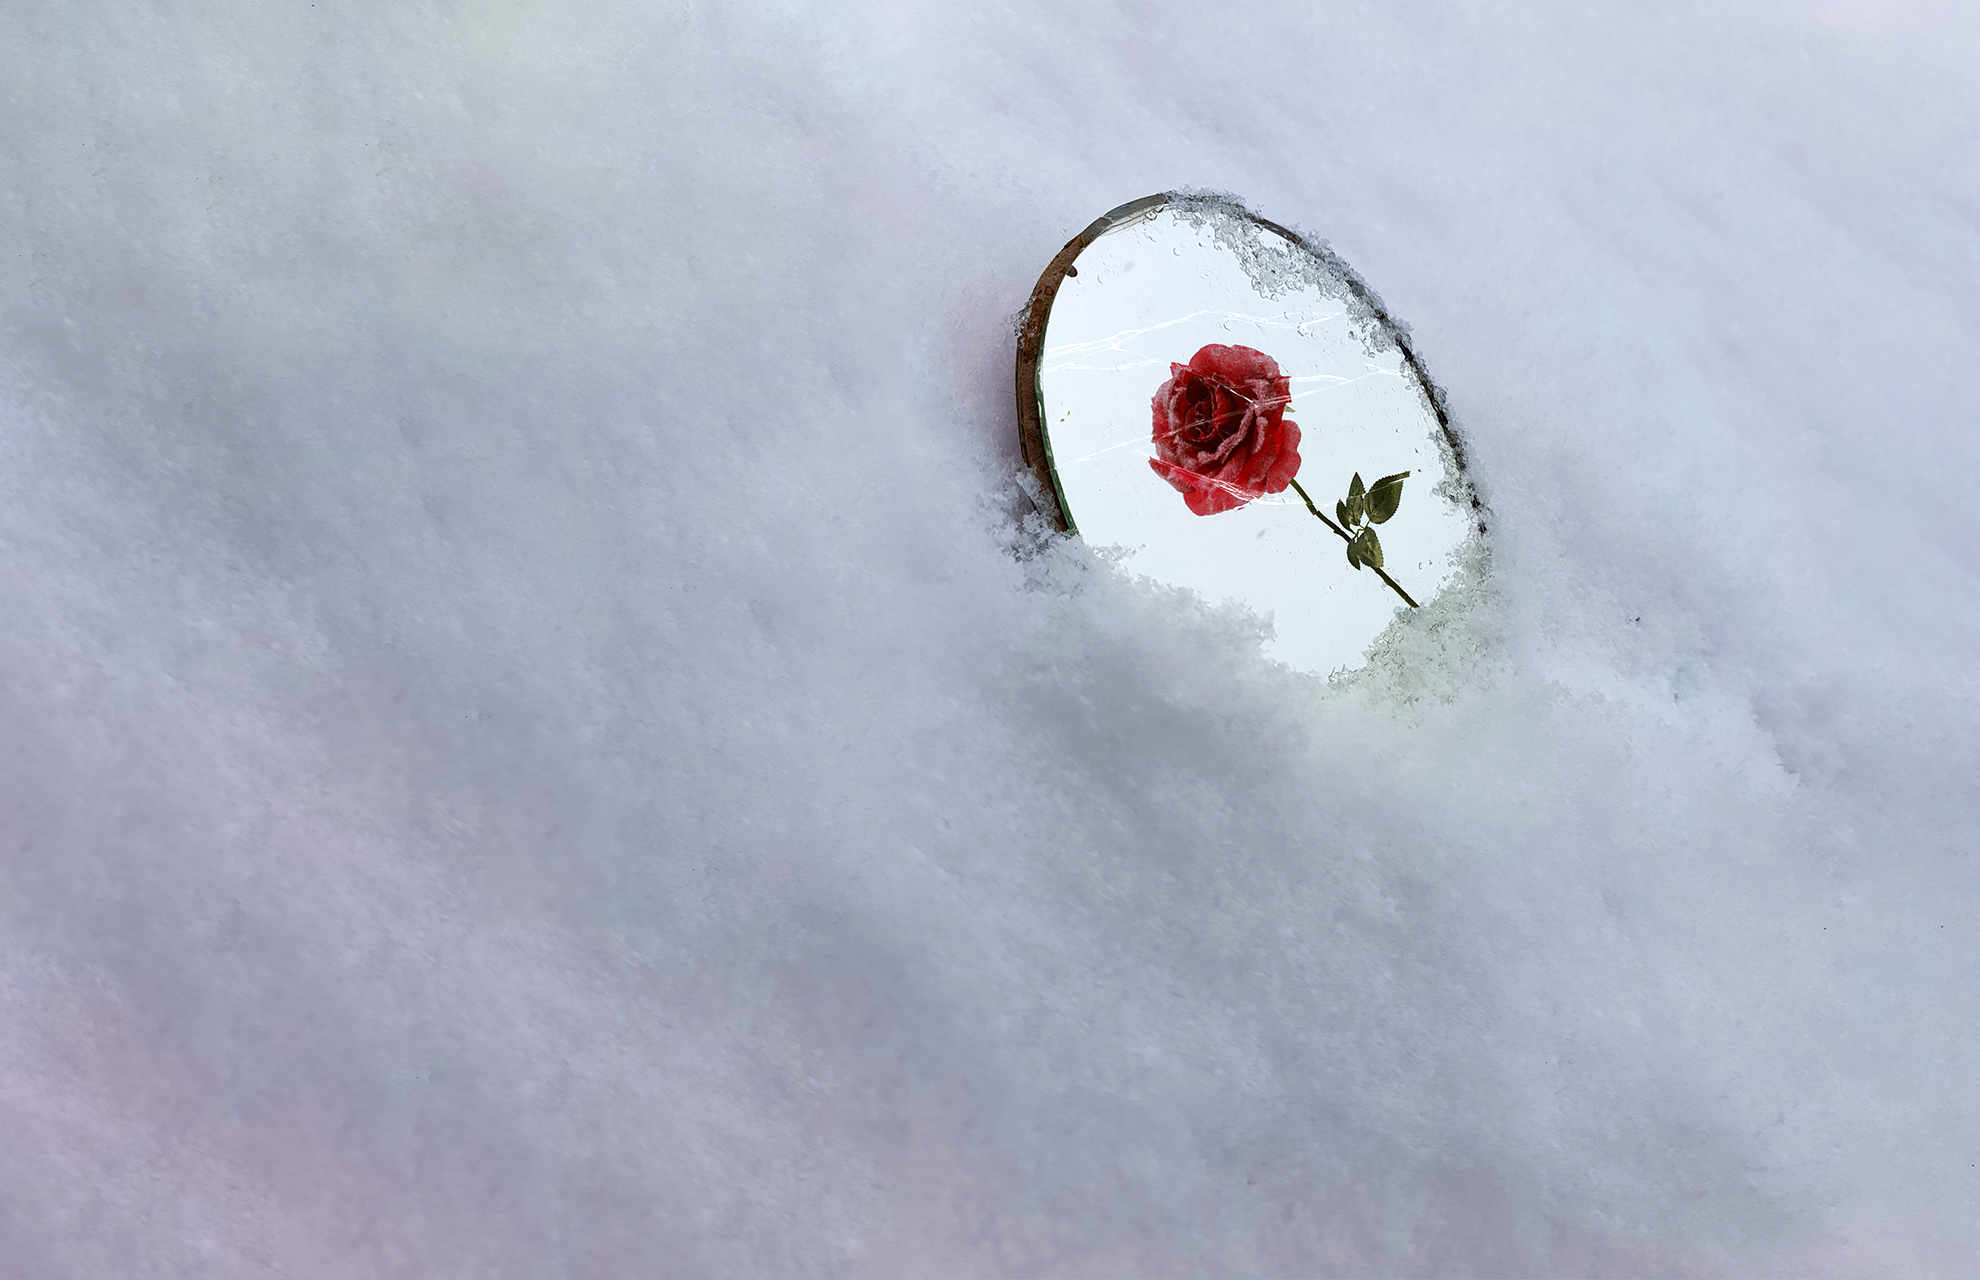 General 1980x1280 snow rose mirror red white photography